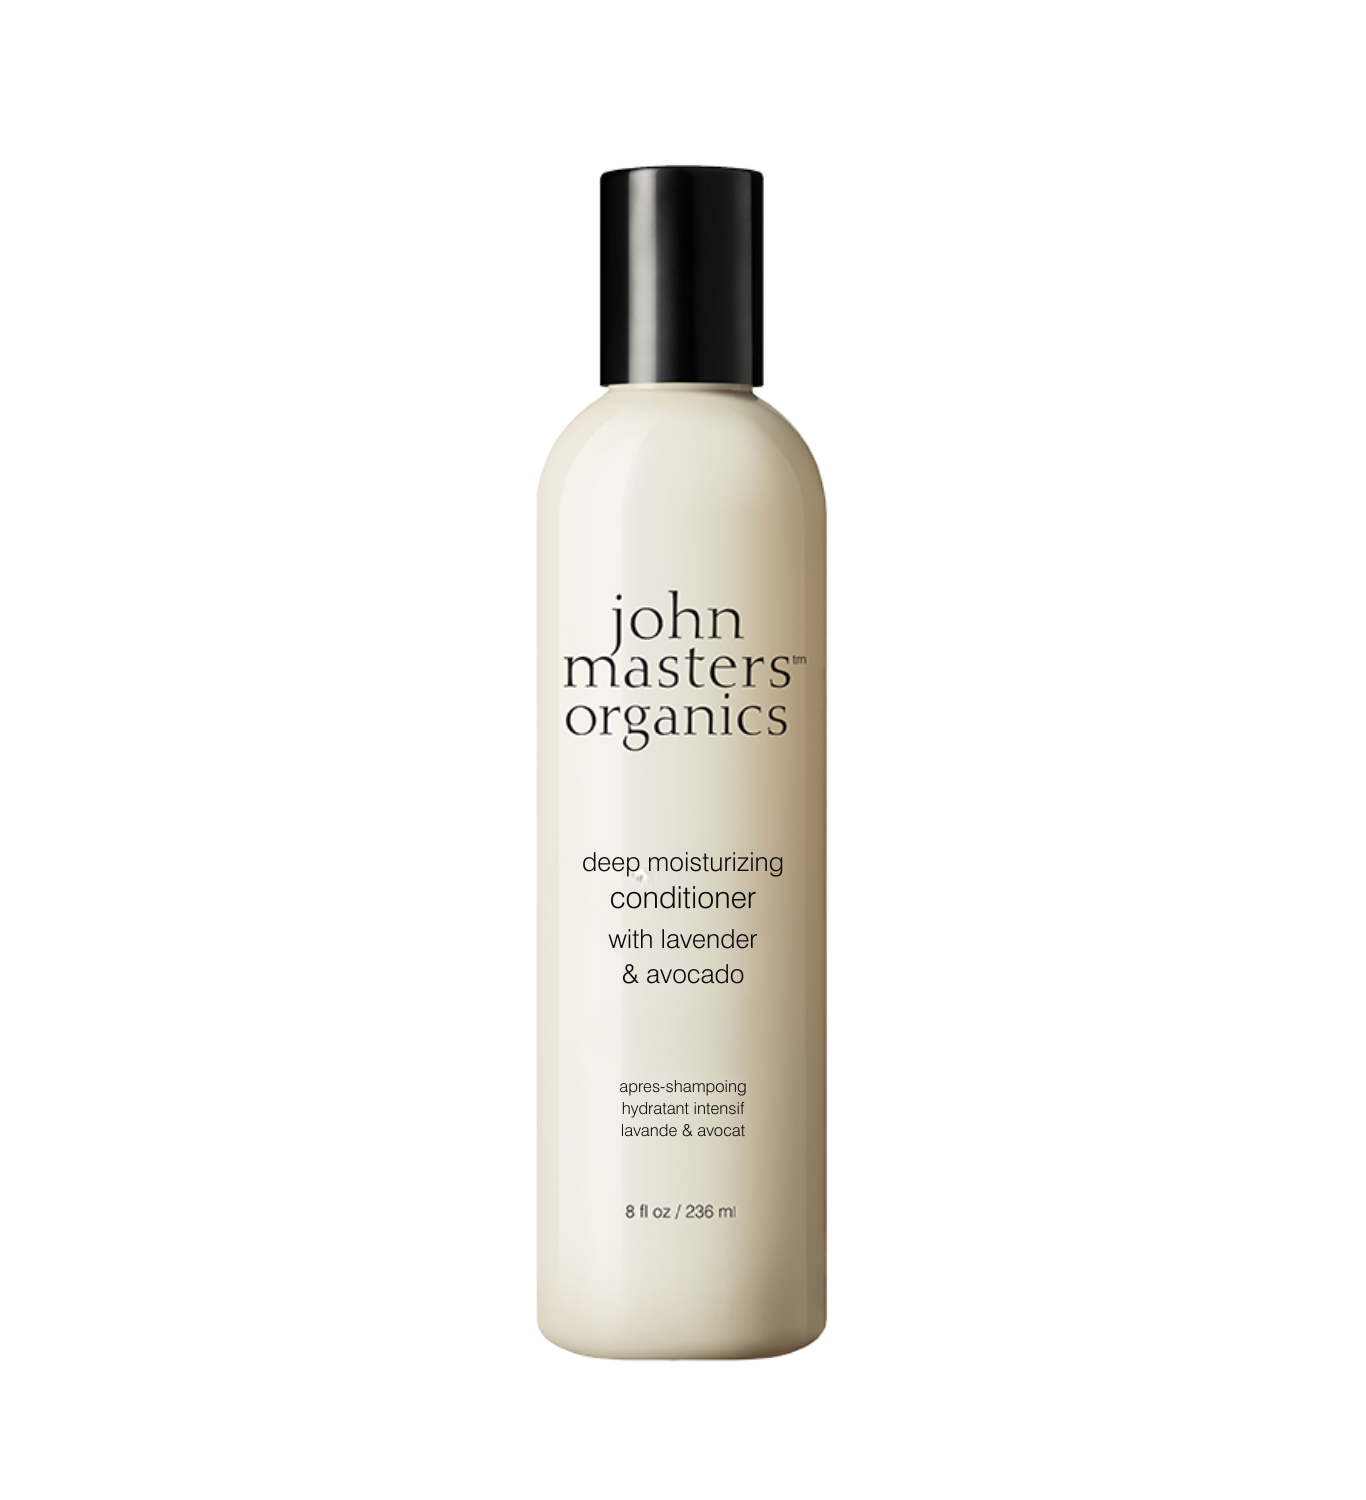 Conditioner for Dry Hair with Lavender & Avocado: 8 fl oz.